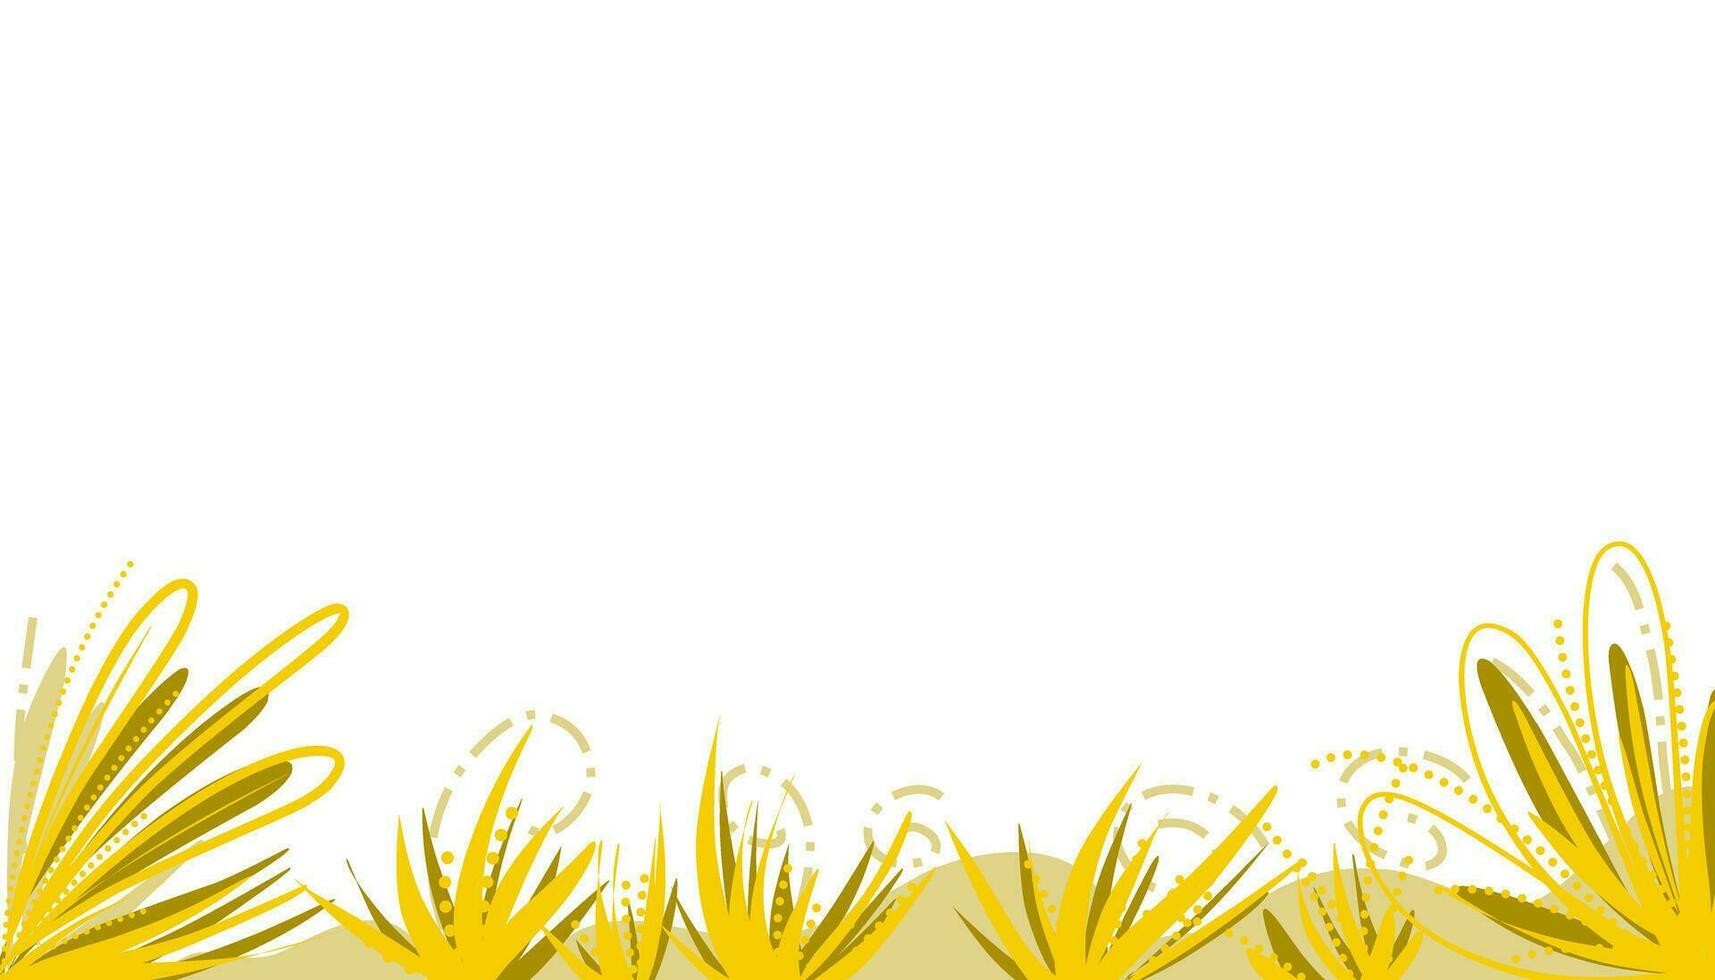 Illustration background with a mellow yellow plant theme. Perfect for wallpaper, invitation cards, envelopes, magazines, book covers. vector